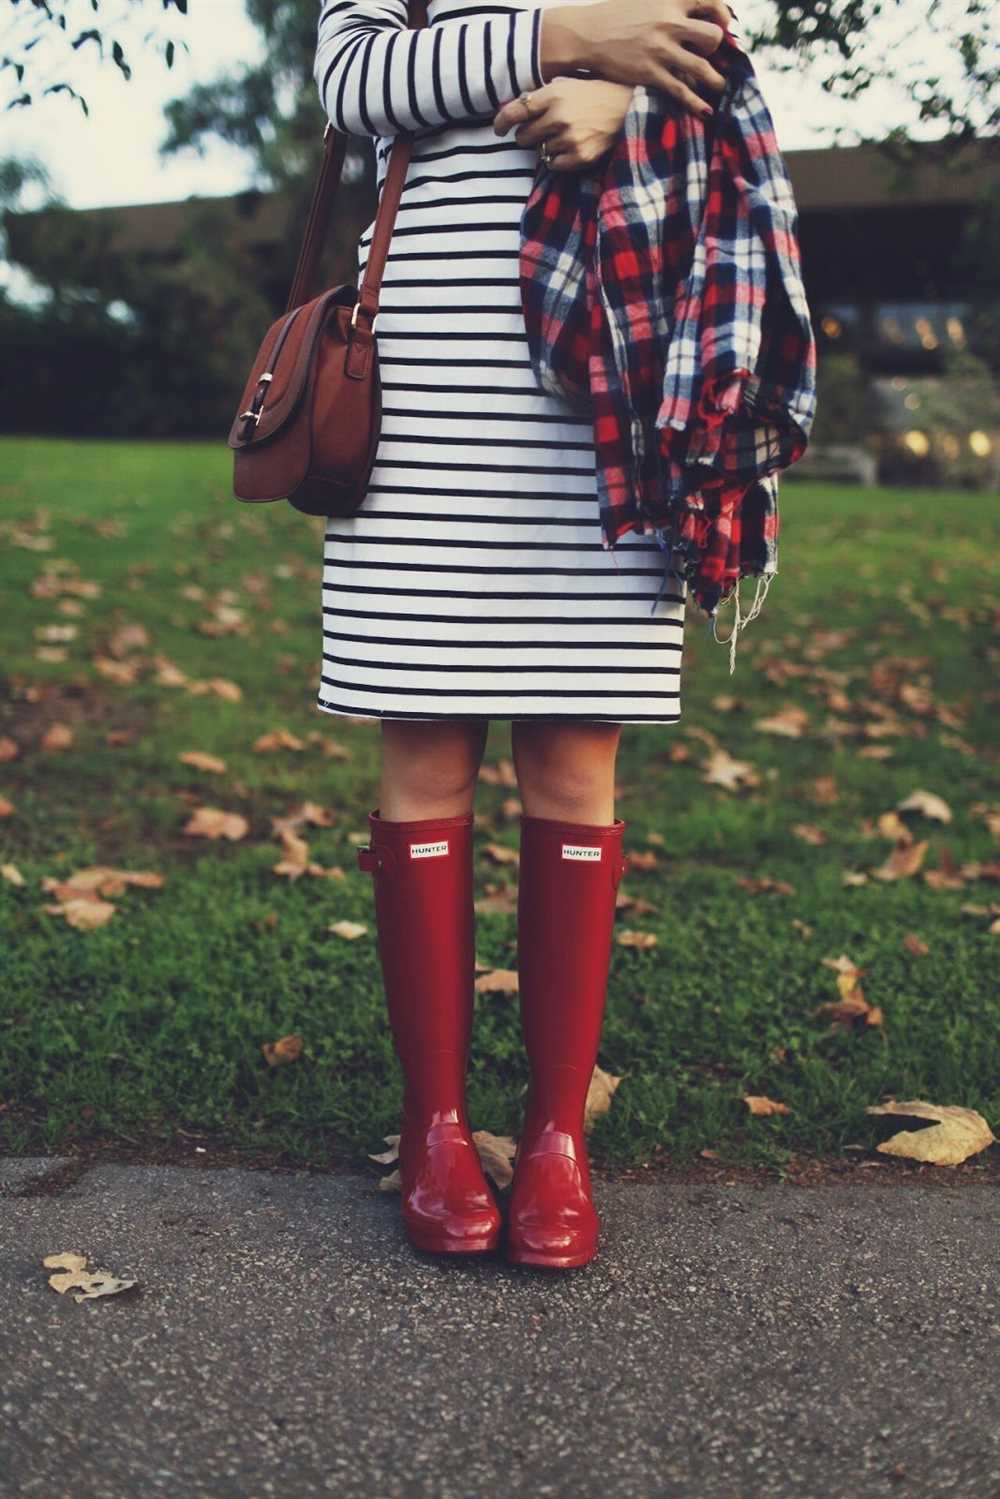 How to wear hunter boots in summer